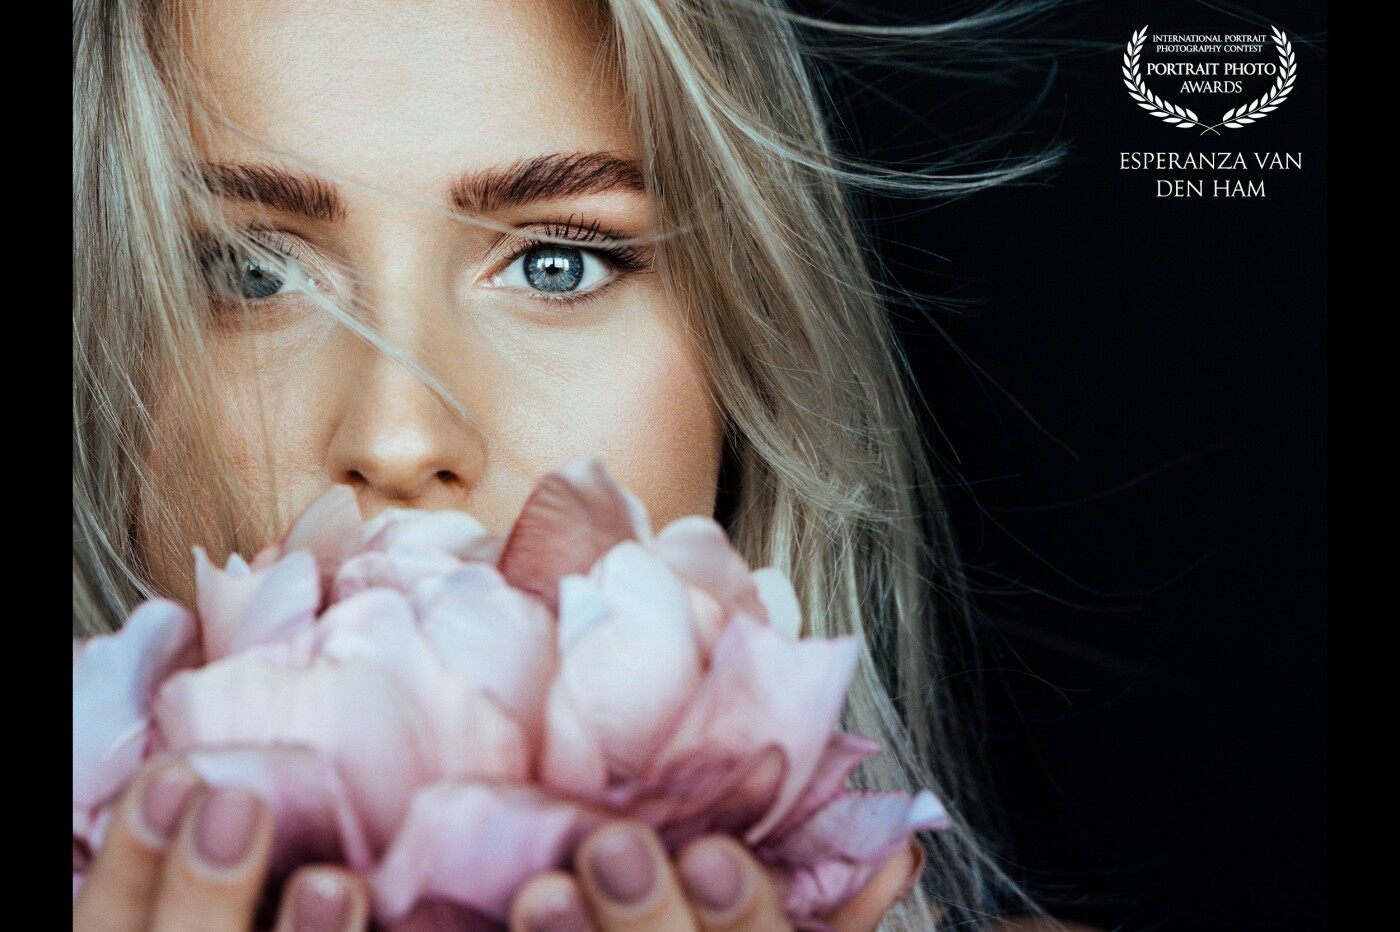 Wind and flowers and focus on the eyes made this photo so magical! <br />
<br />
Model: Eva<br />
Created by: @iamshootingportraits<br />
www.iamshootingportraits.nl